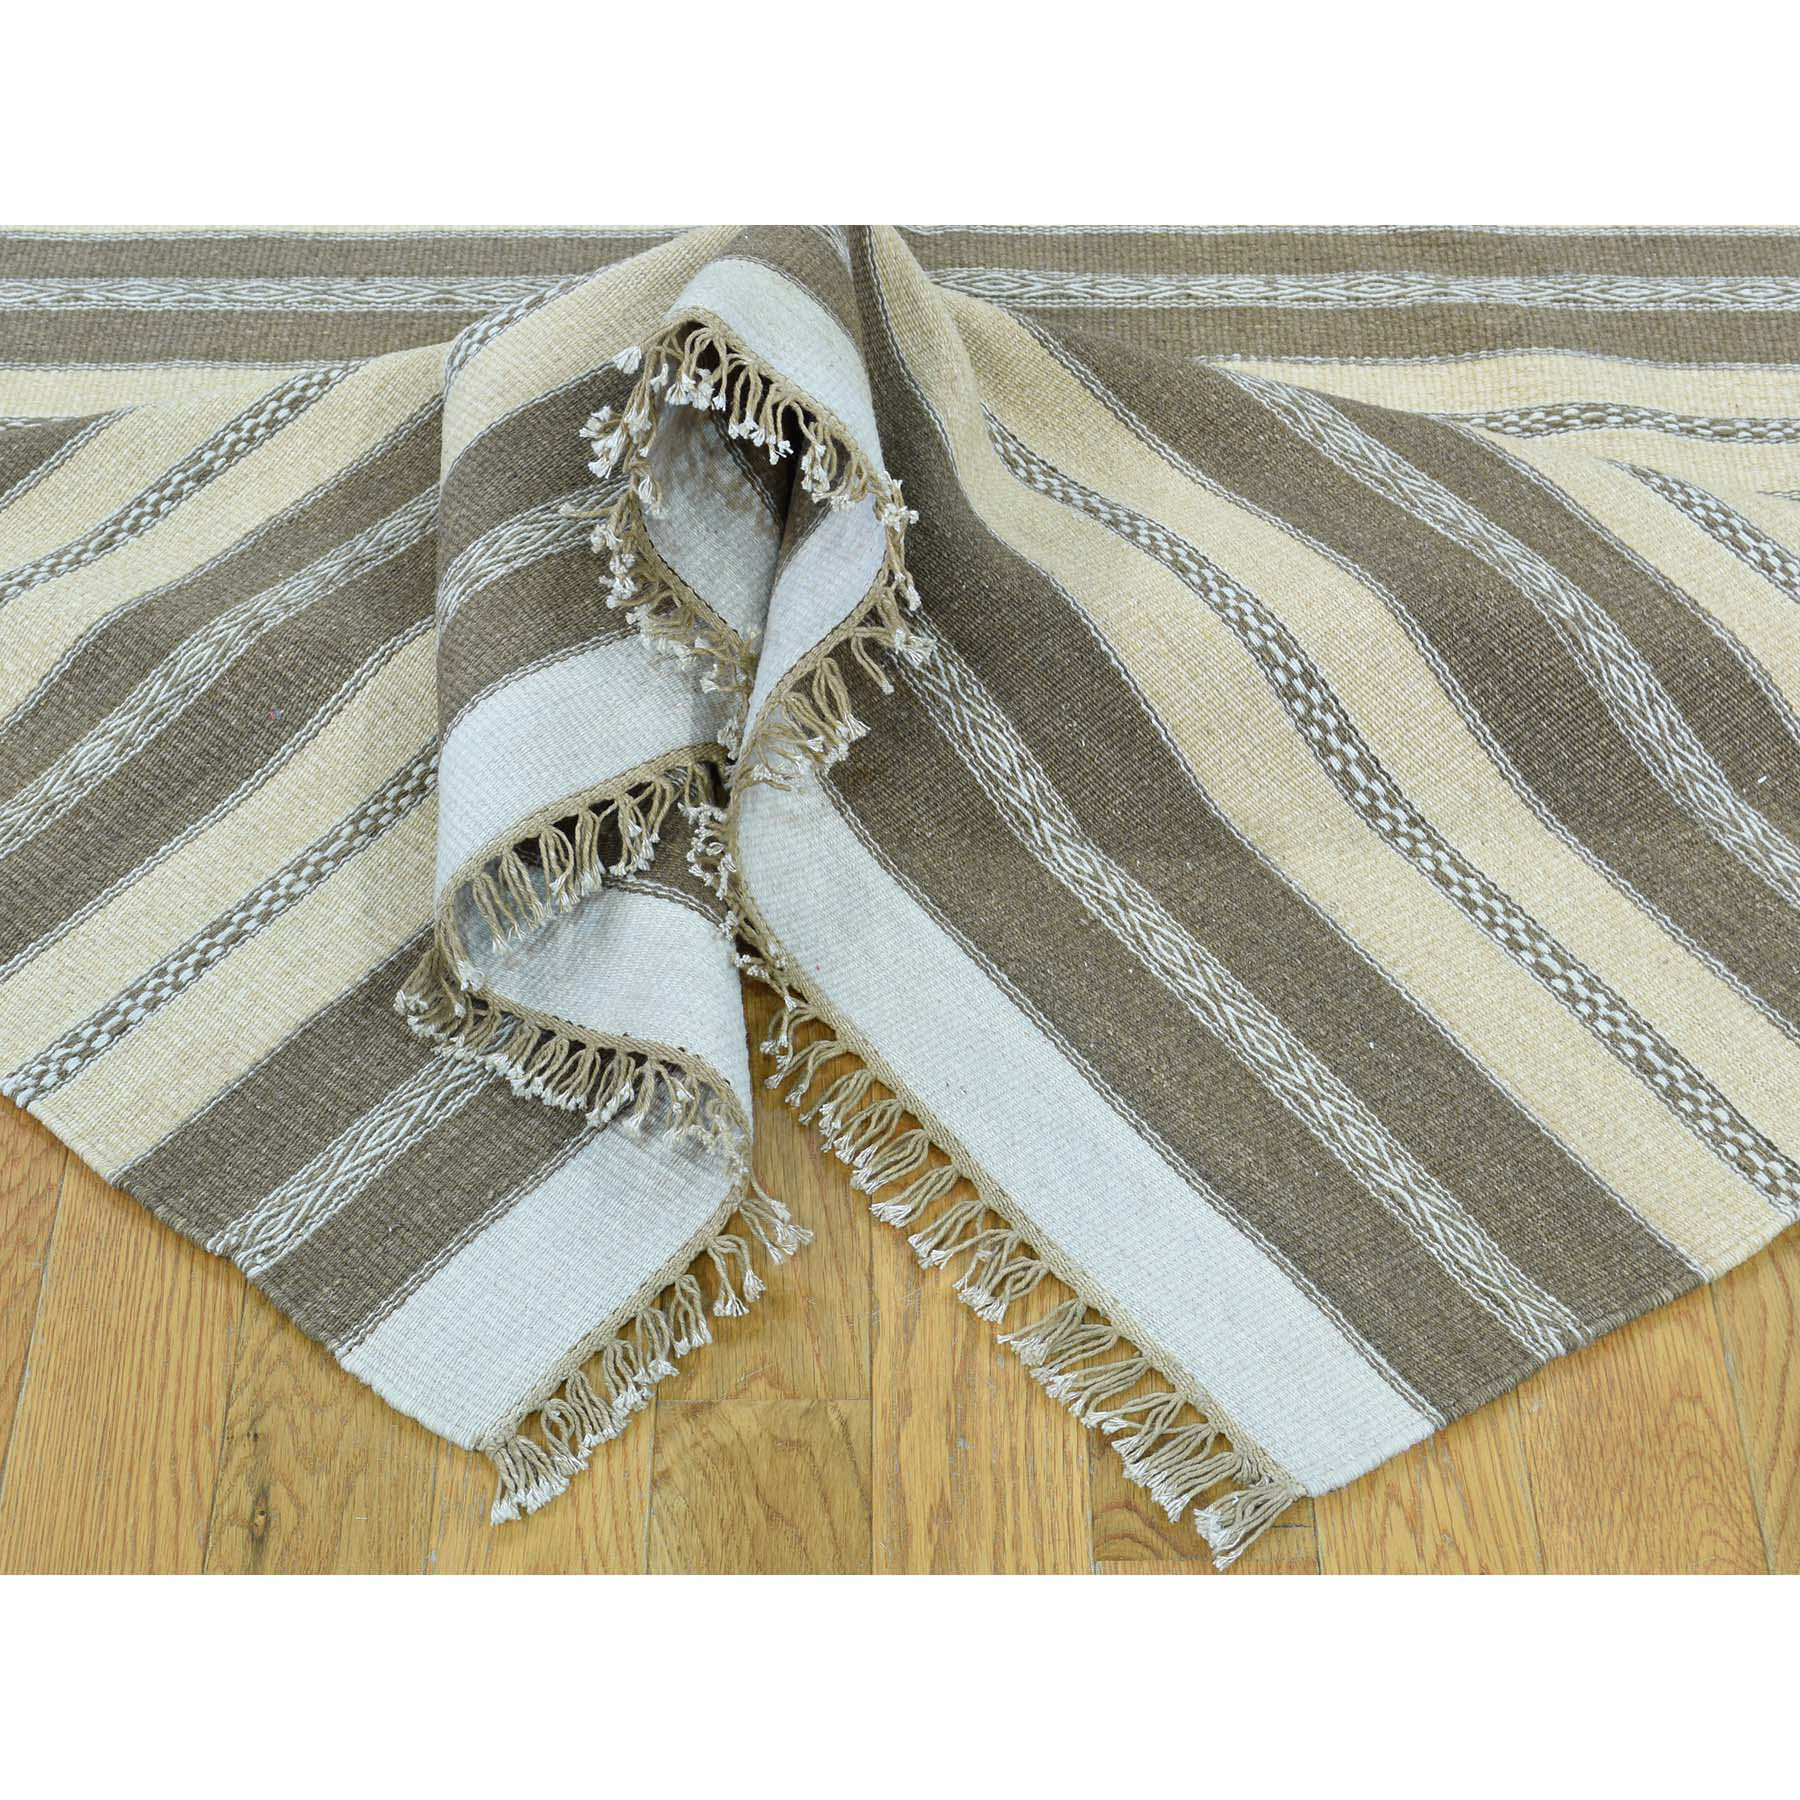 5-x8-1  On Clearance Hand-Woven Striped Flat Weave Kilim Pure Wool Oriental Rug 